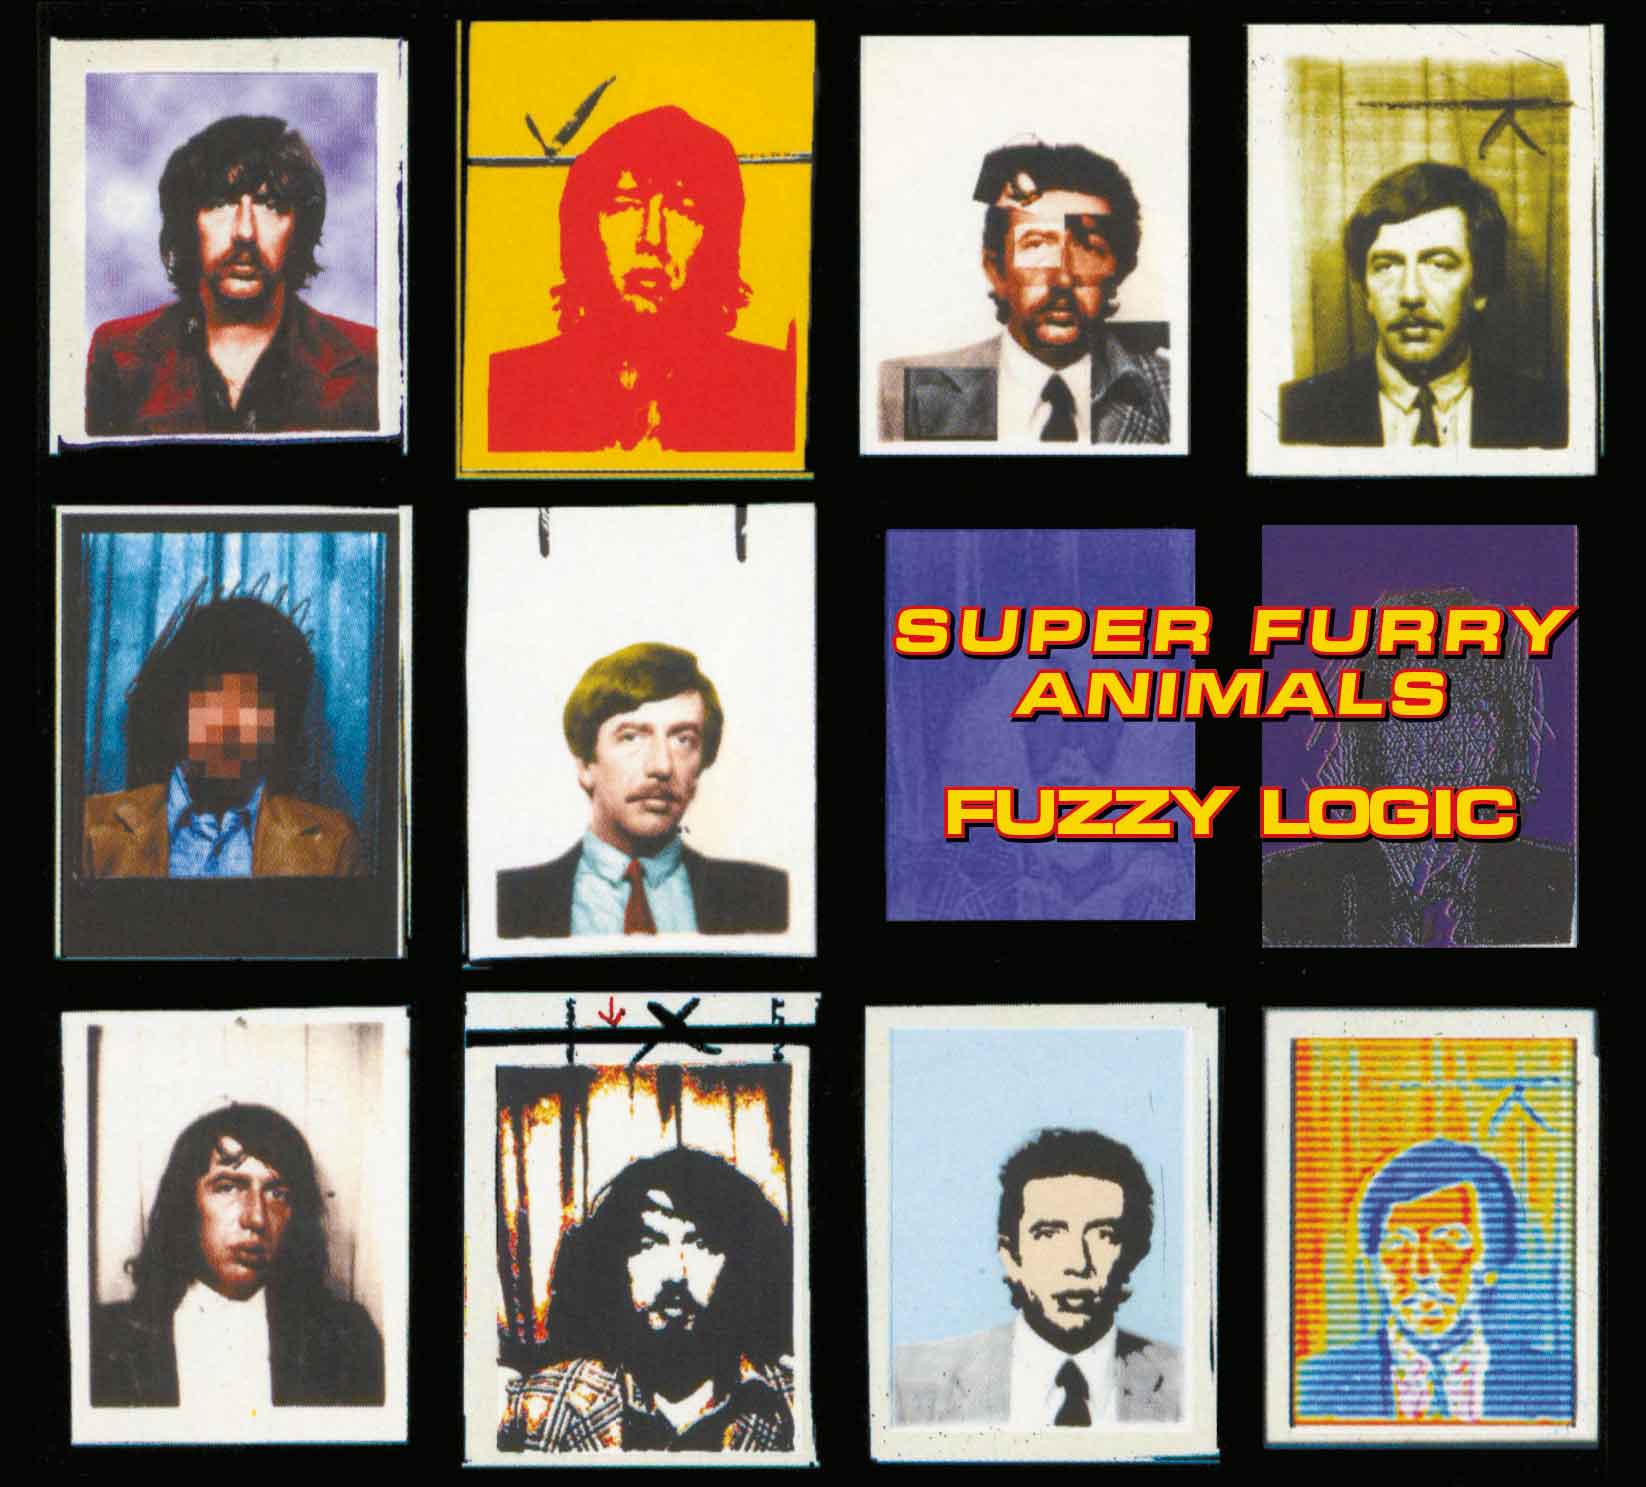 NEWS: Listen to a previously-unheard demo of Super Furry Animals’ ‘The Man Don’t Give A F***’